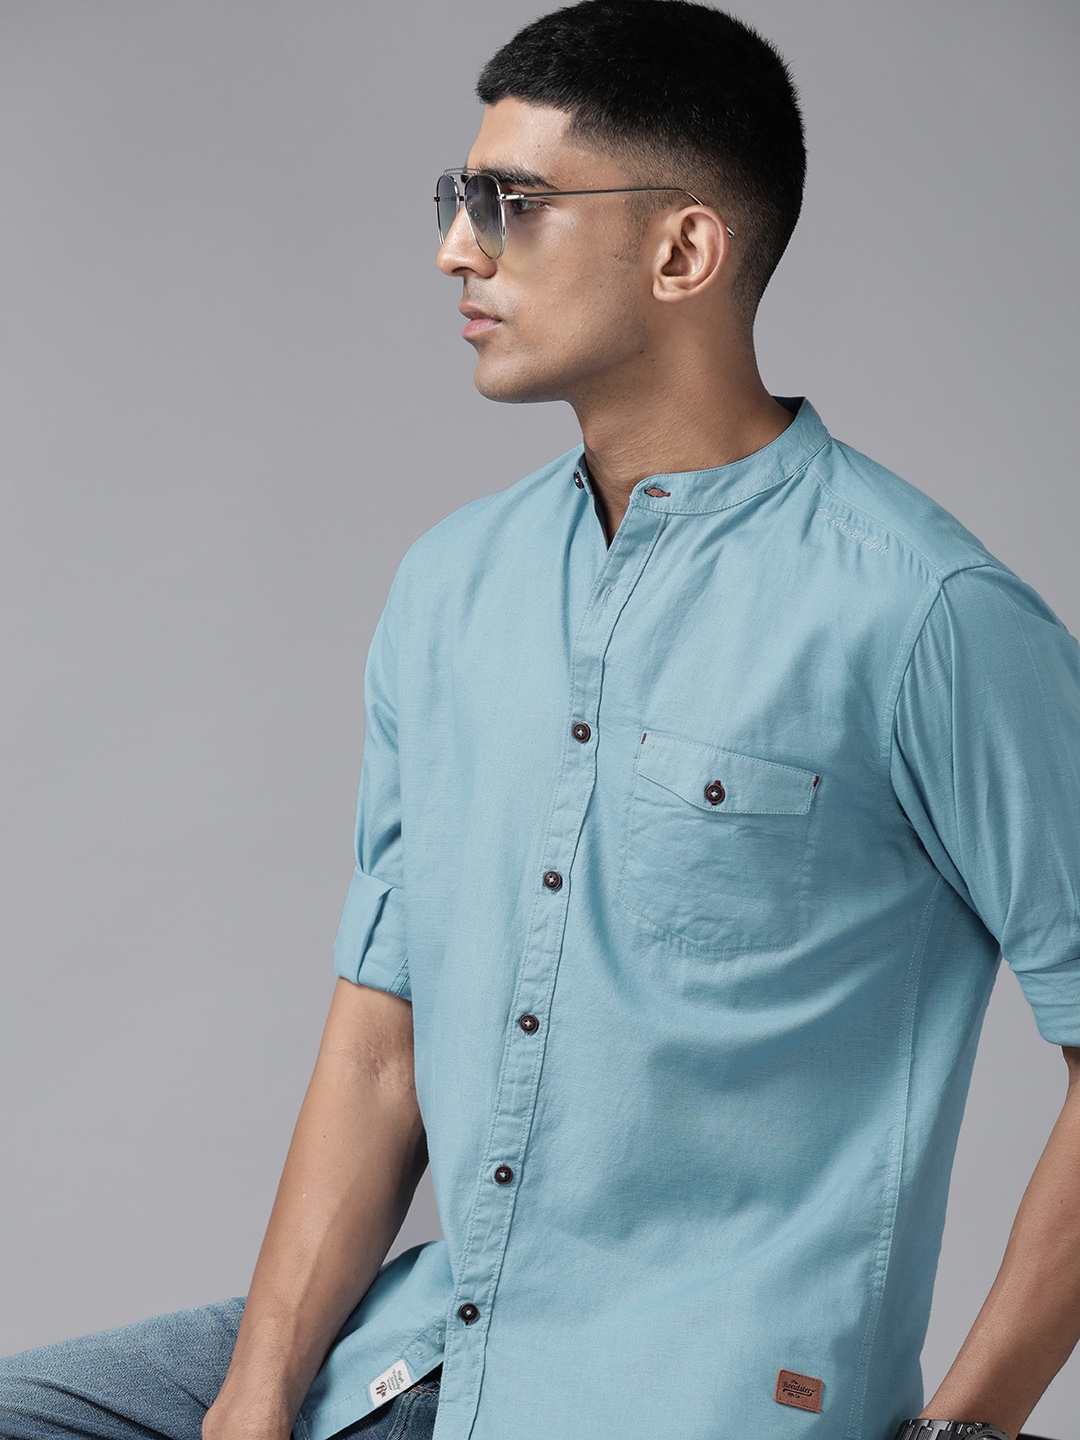 Roadster The Lifestyle Co. Band Collar Cotton Casual Shirt